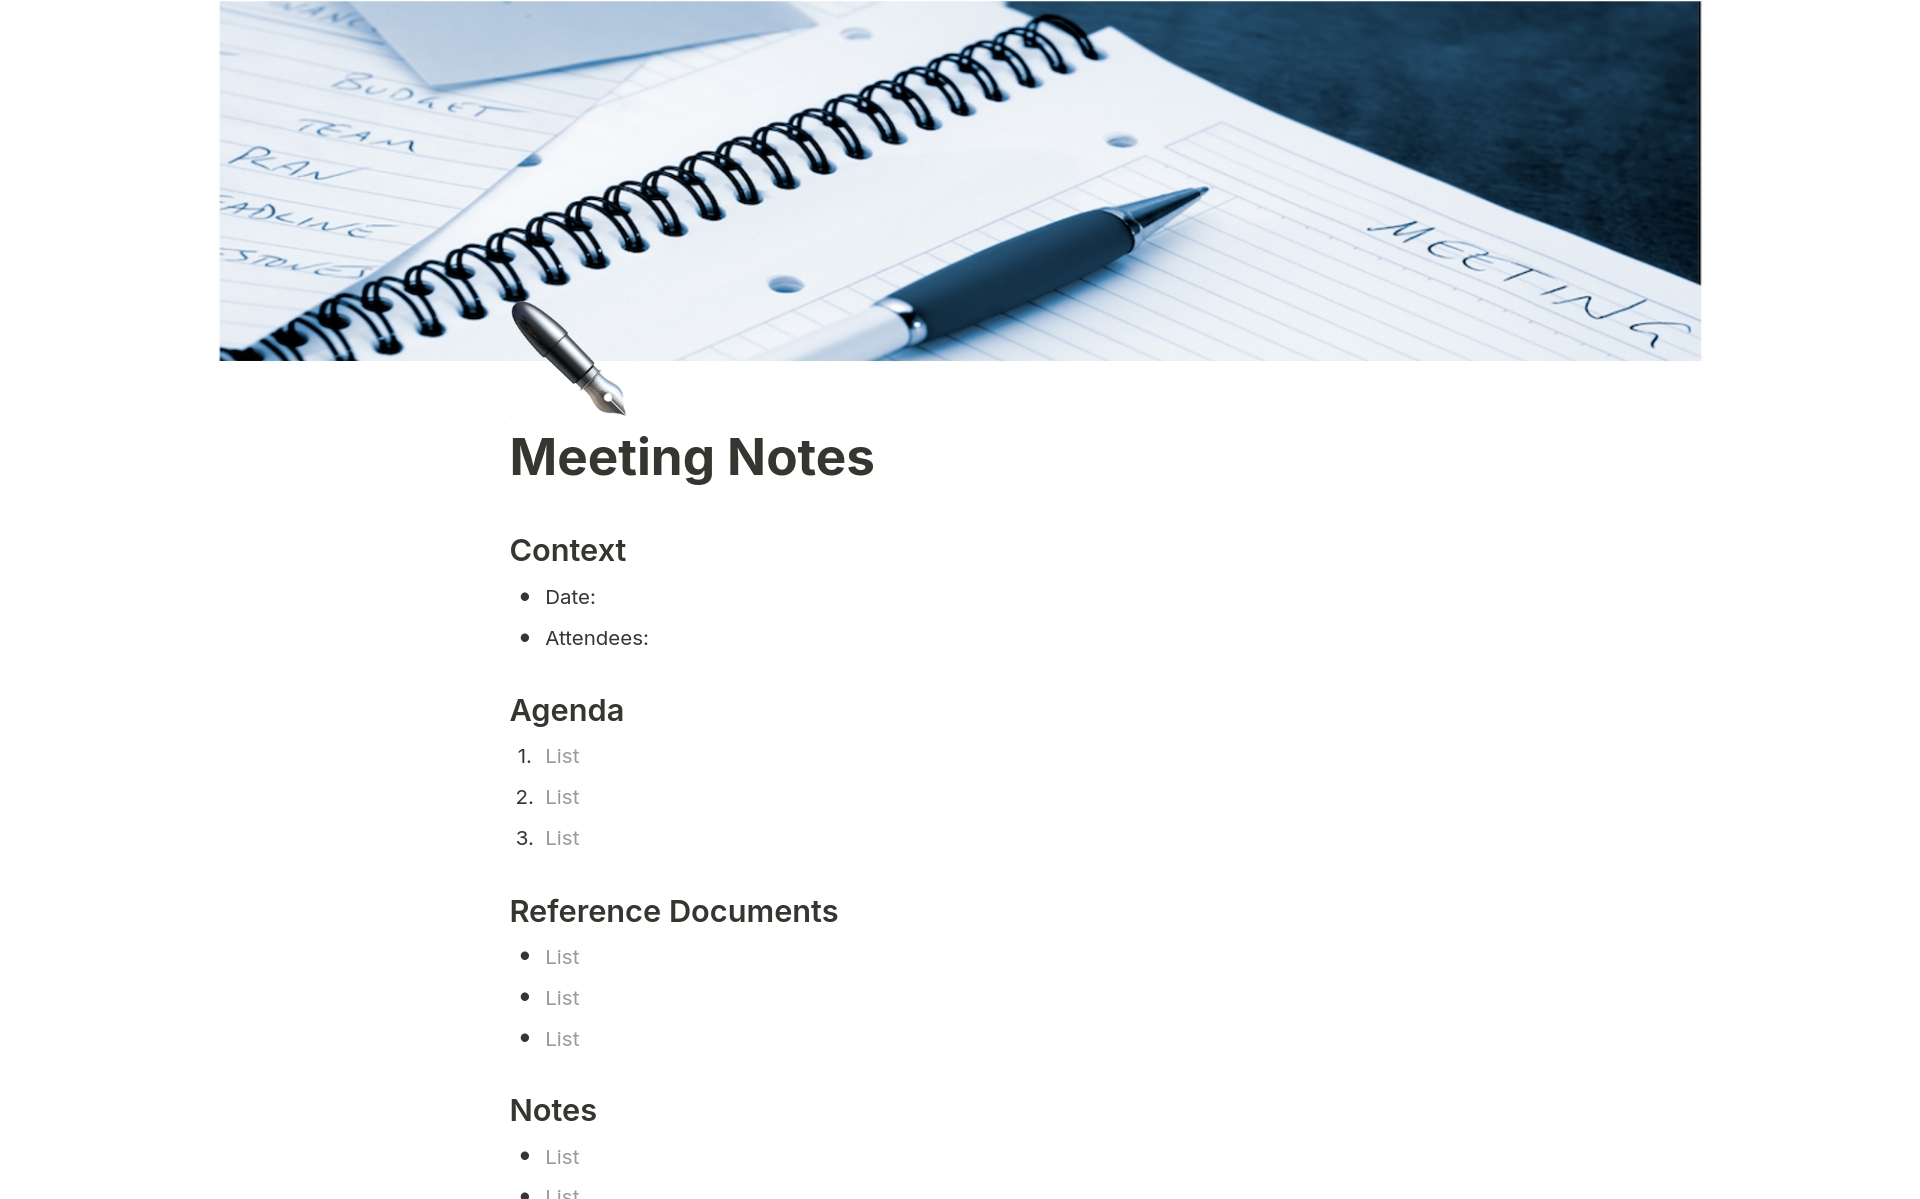 Simple and easy to use template for your day to day meetings